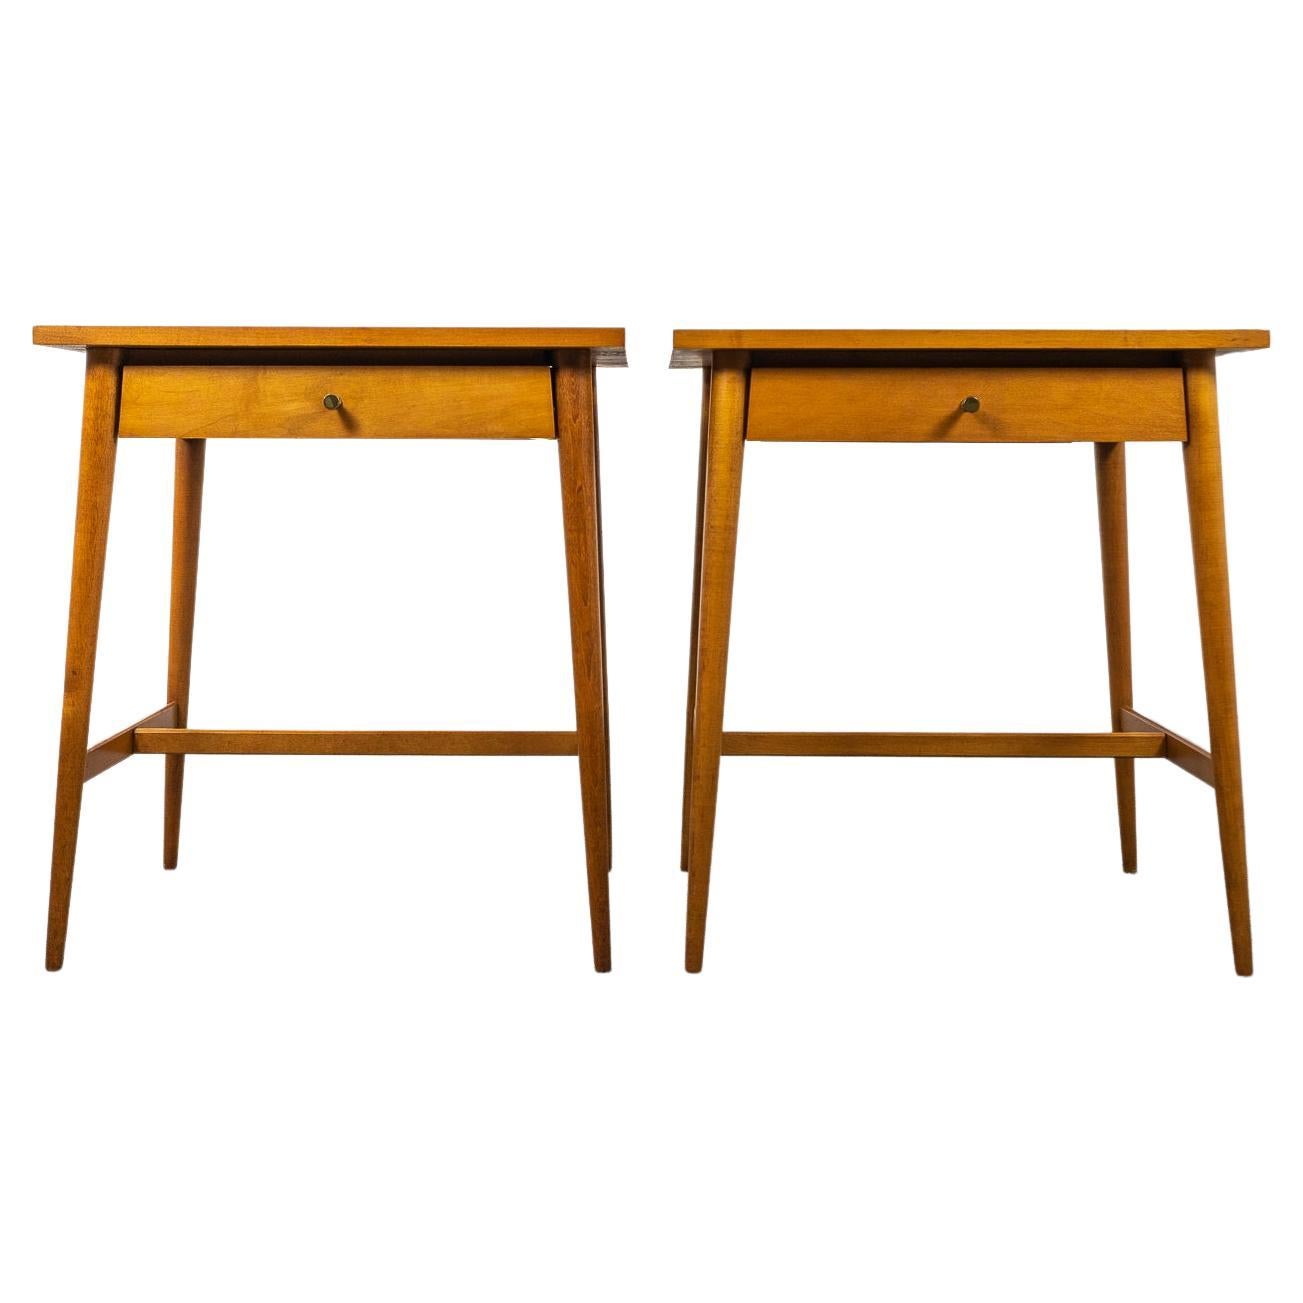 Maple Bedside Table Pair, by Paul McCobb